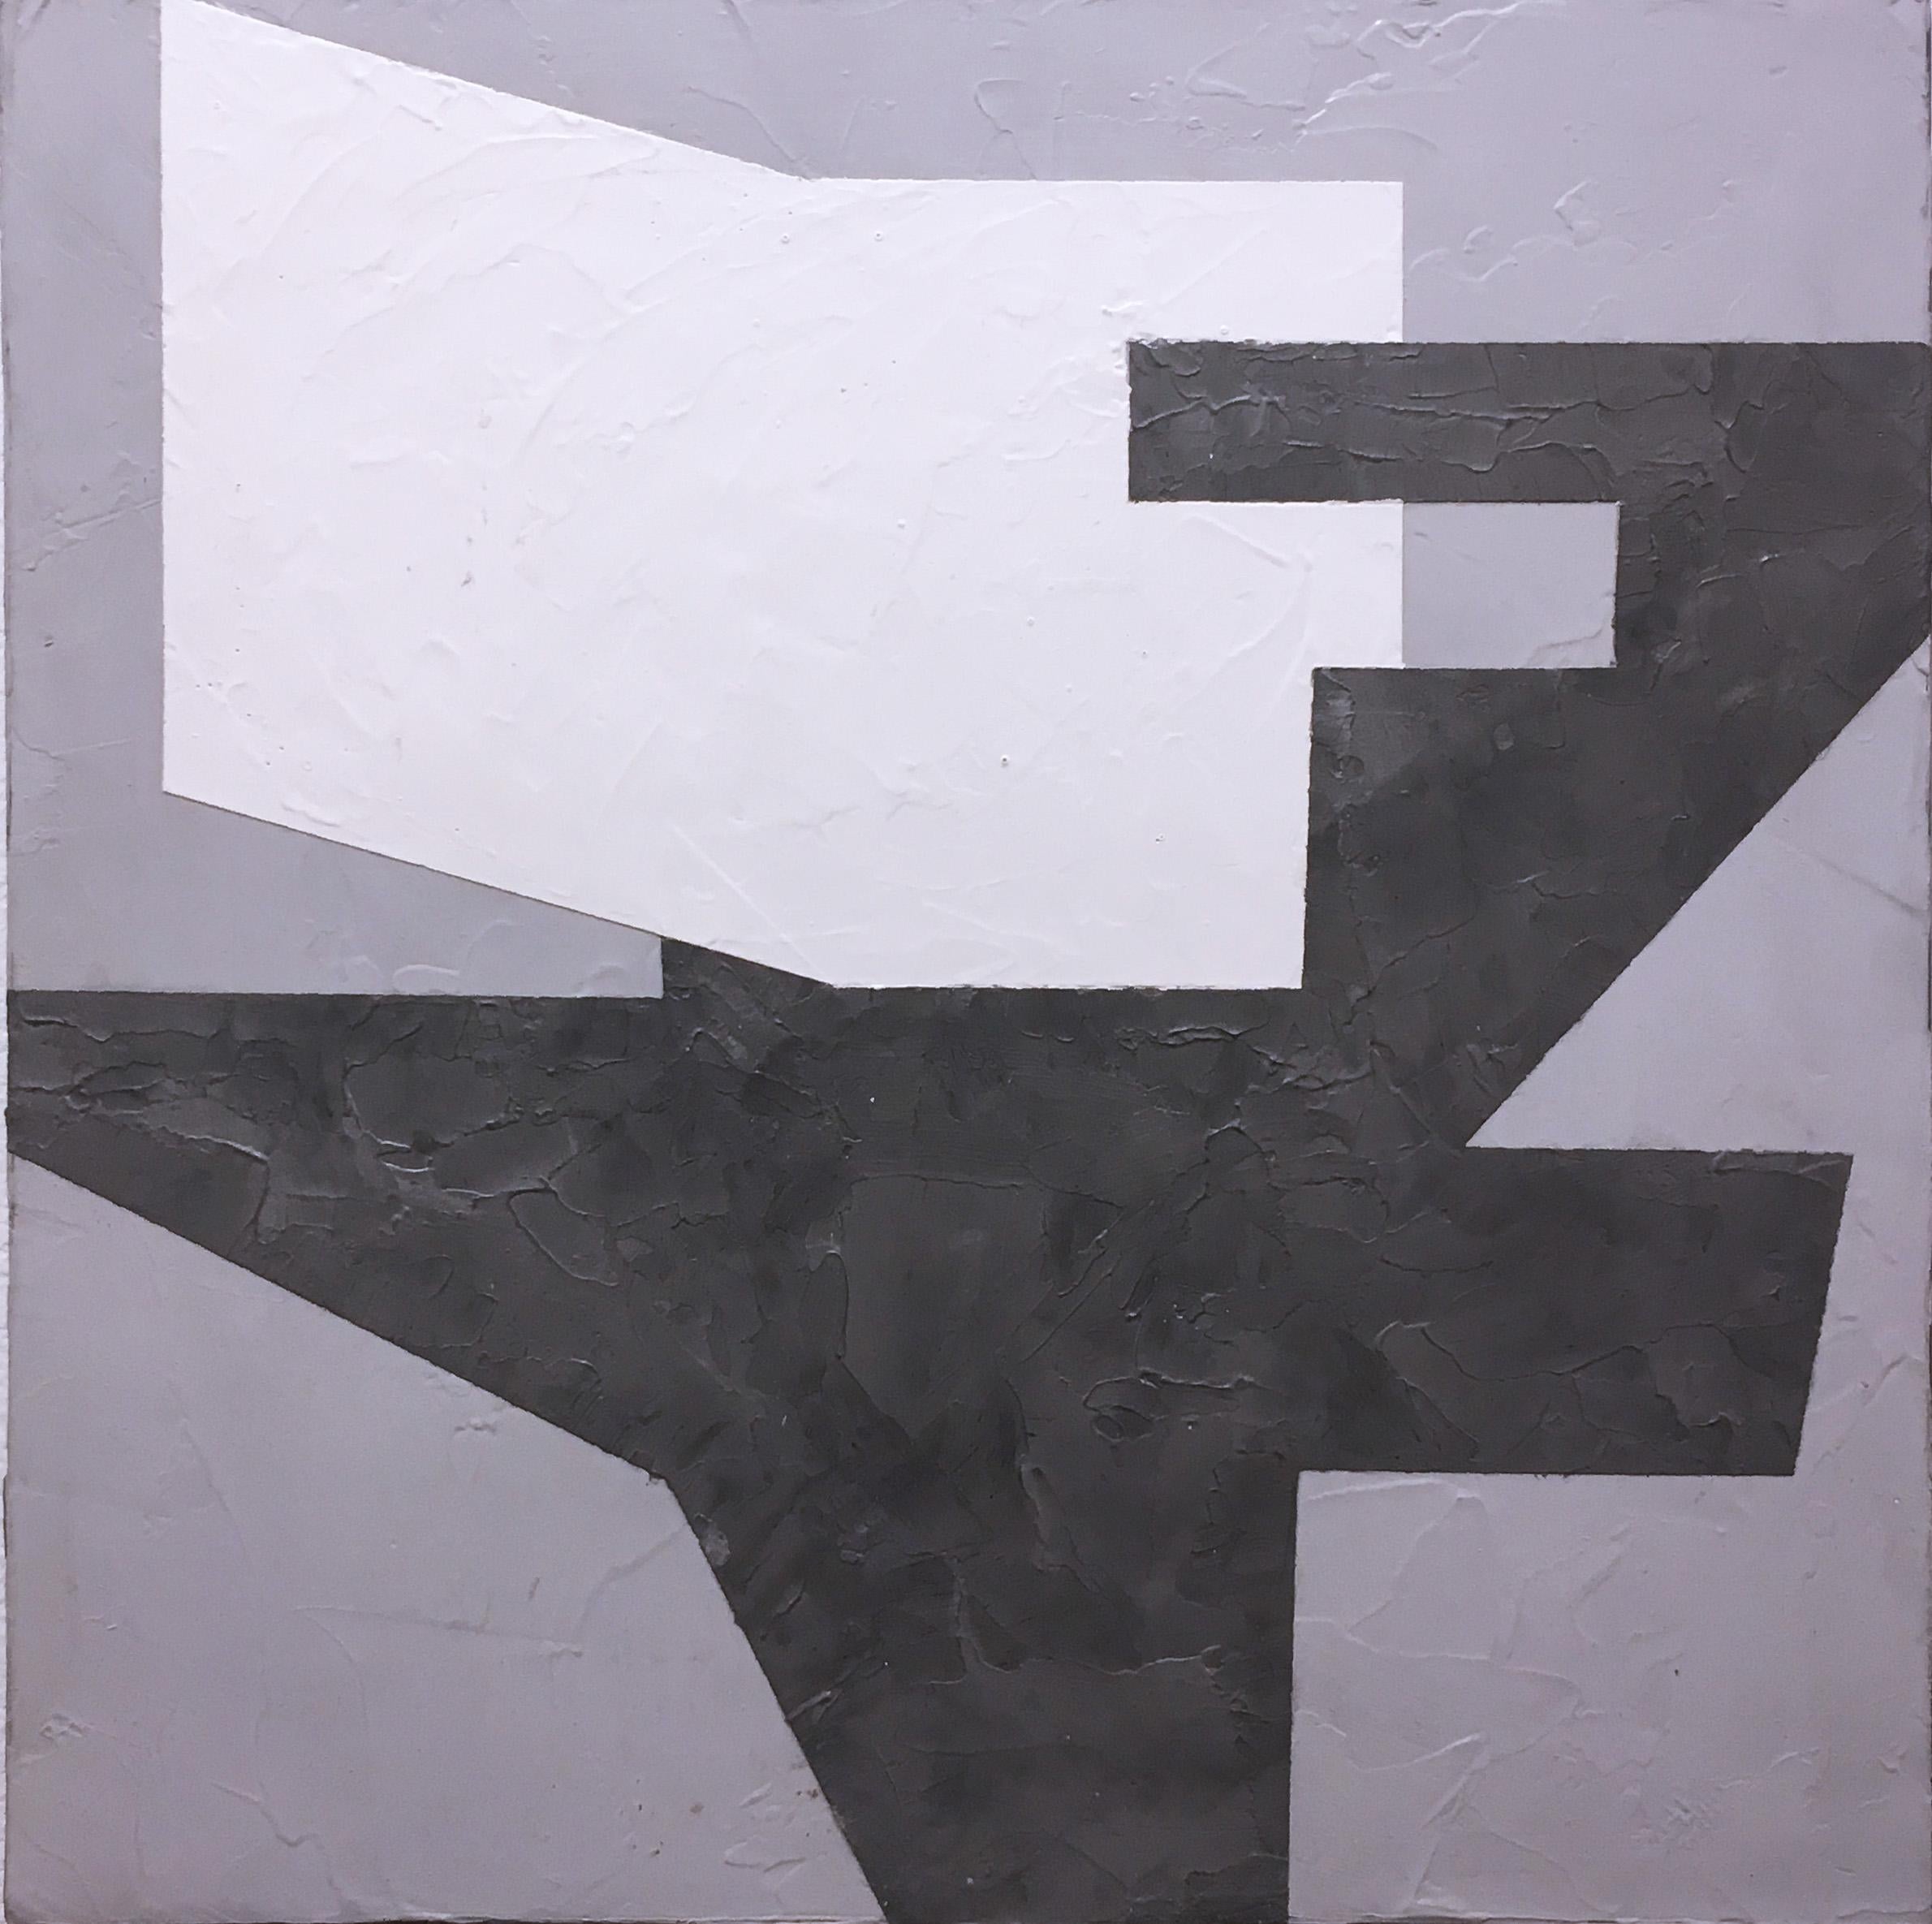 Balancing II, 2019, Abstract geometry, non-objective, plaster, black, white gray - Mixed Media Art by Kati Vilim